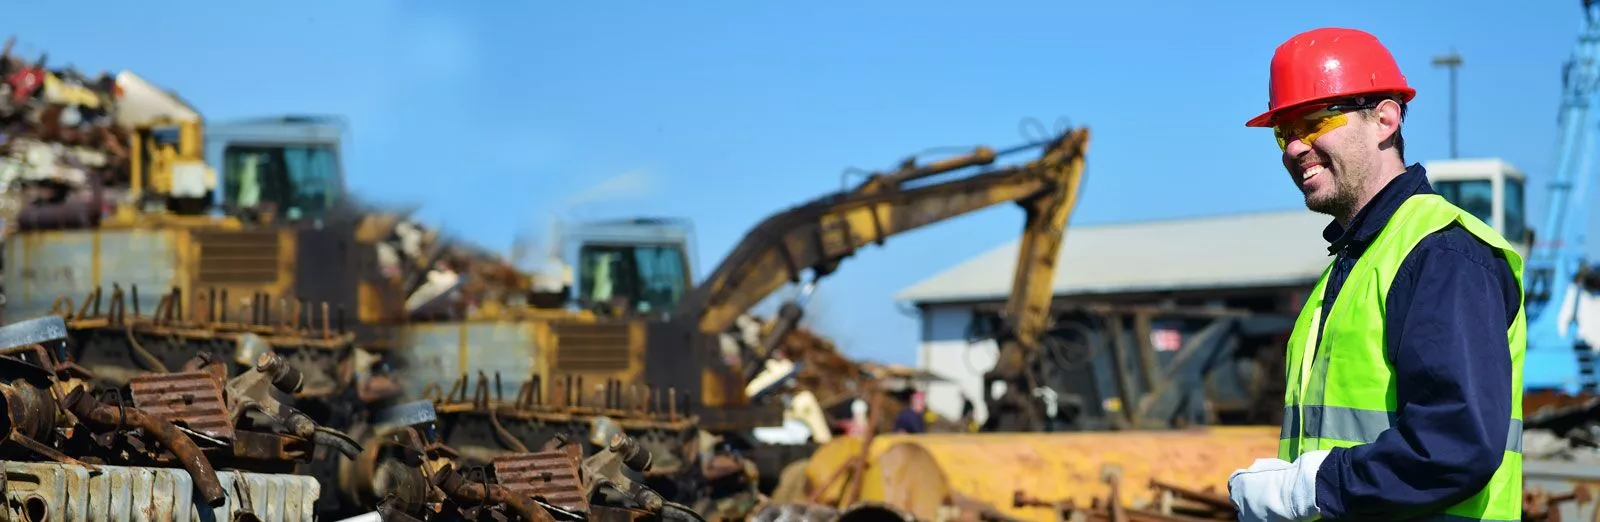 7 Interesting Facts about Scrap Metal